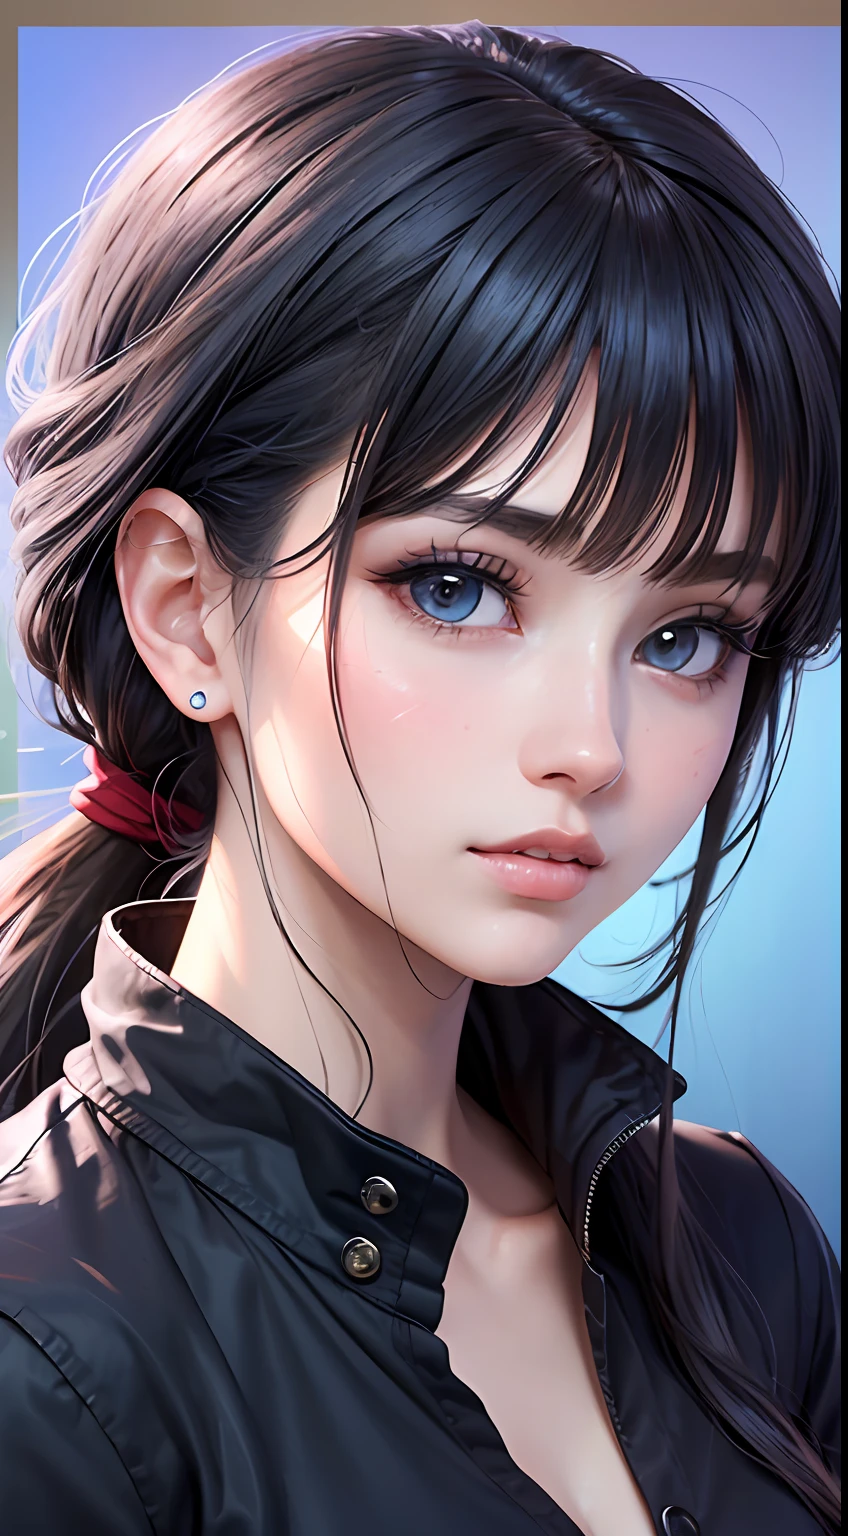 anime styled、One Person１８Beautiful woman of age、Moisturizing and beautiful eyes、 (Casual clothing)ciri、a picture、androgynous hunnuman、oval jaw、Delicate features、Beautiful expression、beautiful hair of black color、Long bangs、long pony tail、high saturation blue eyes with a beautiful shine,、LDS Art